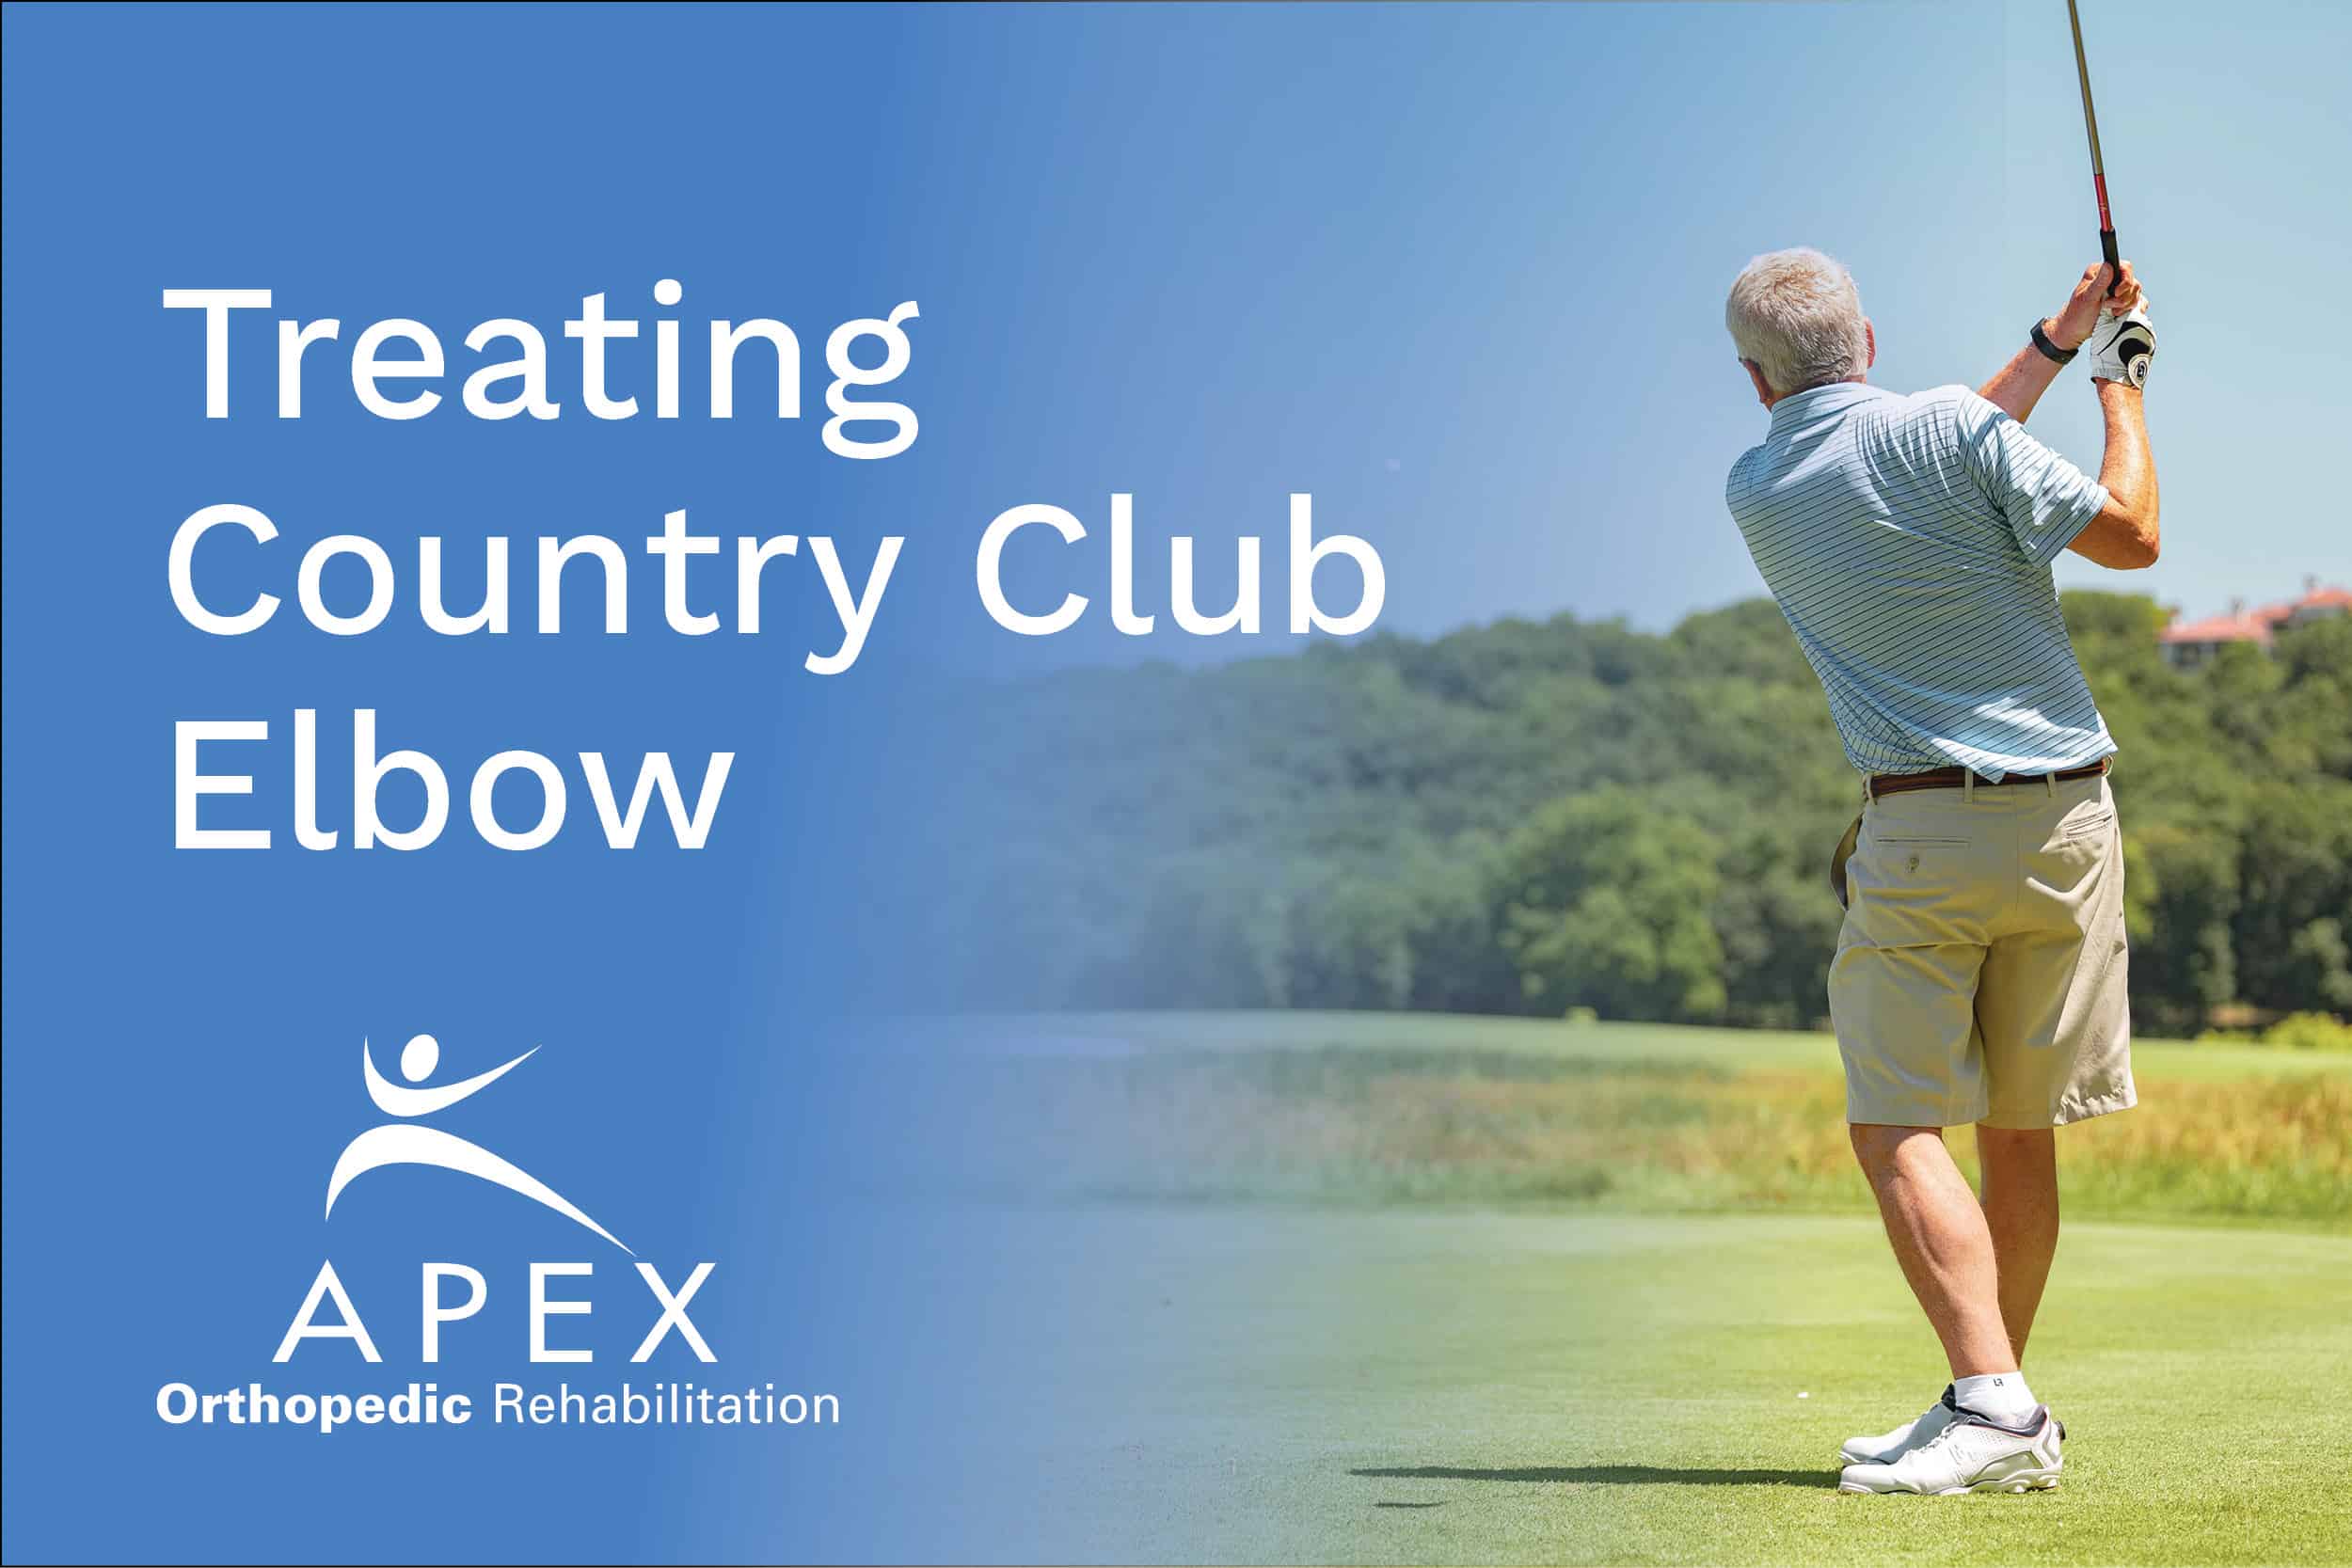 Treating Country Club Elbow